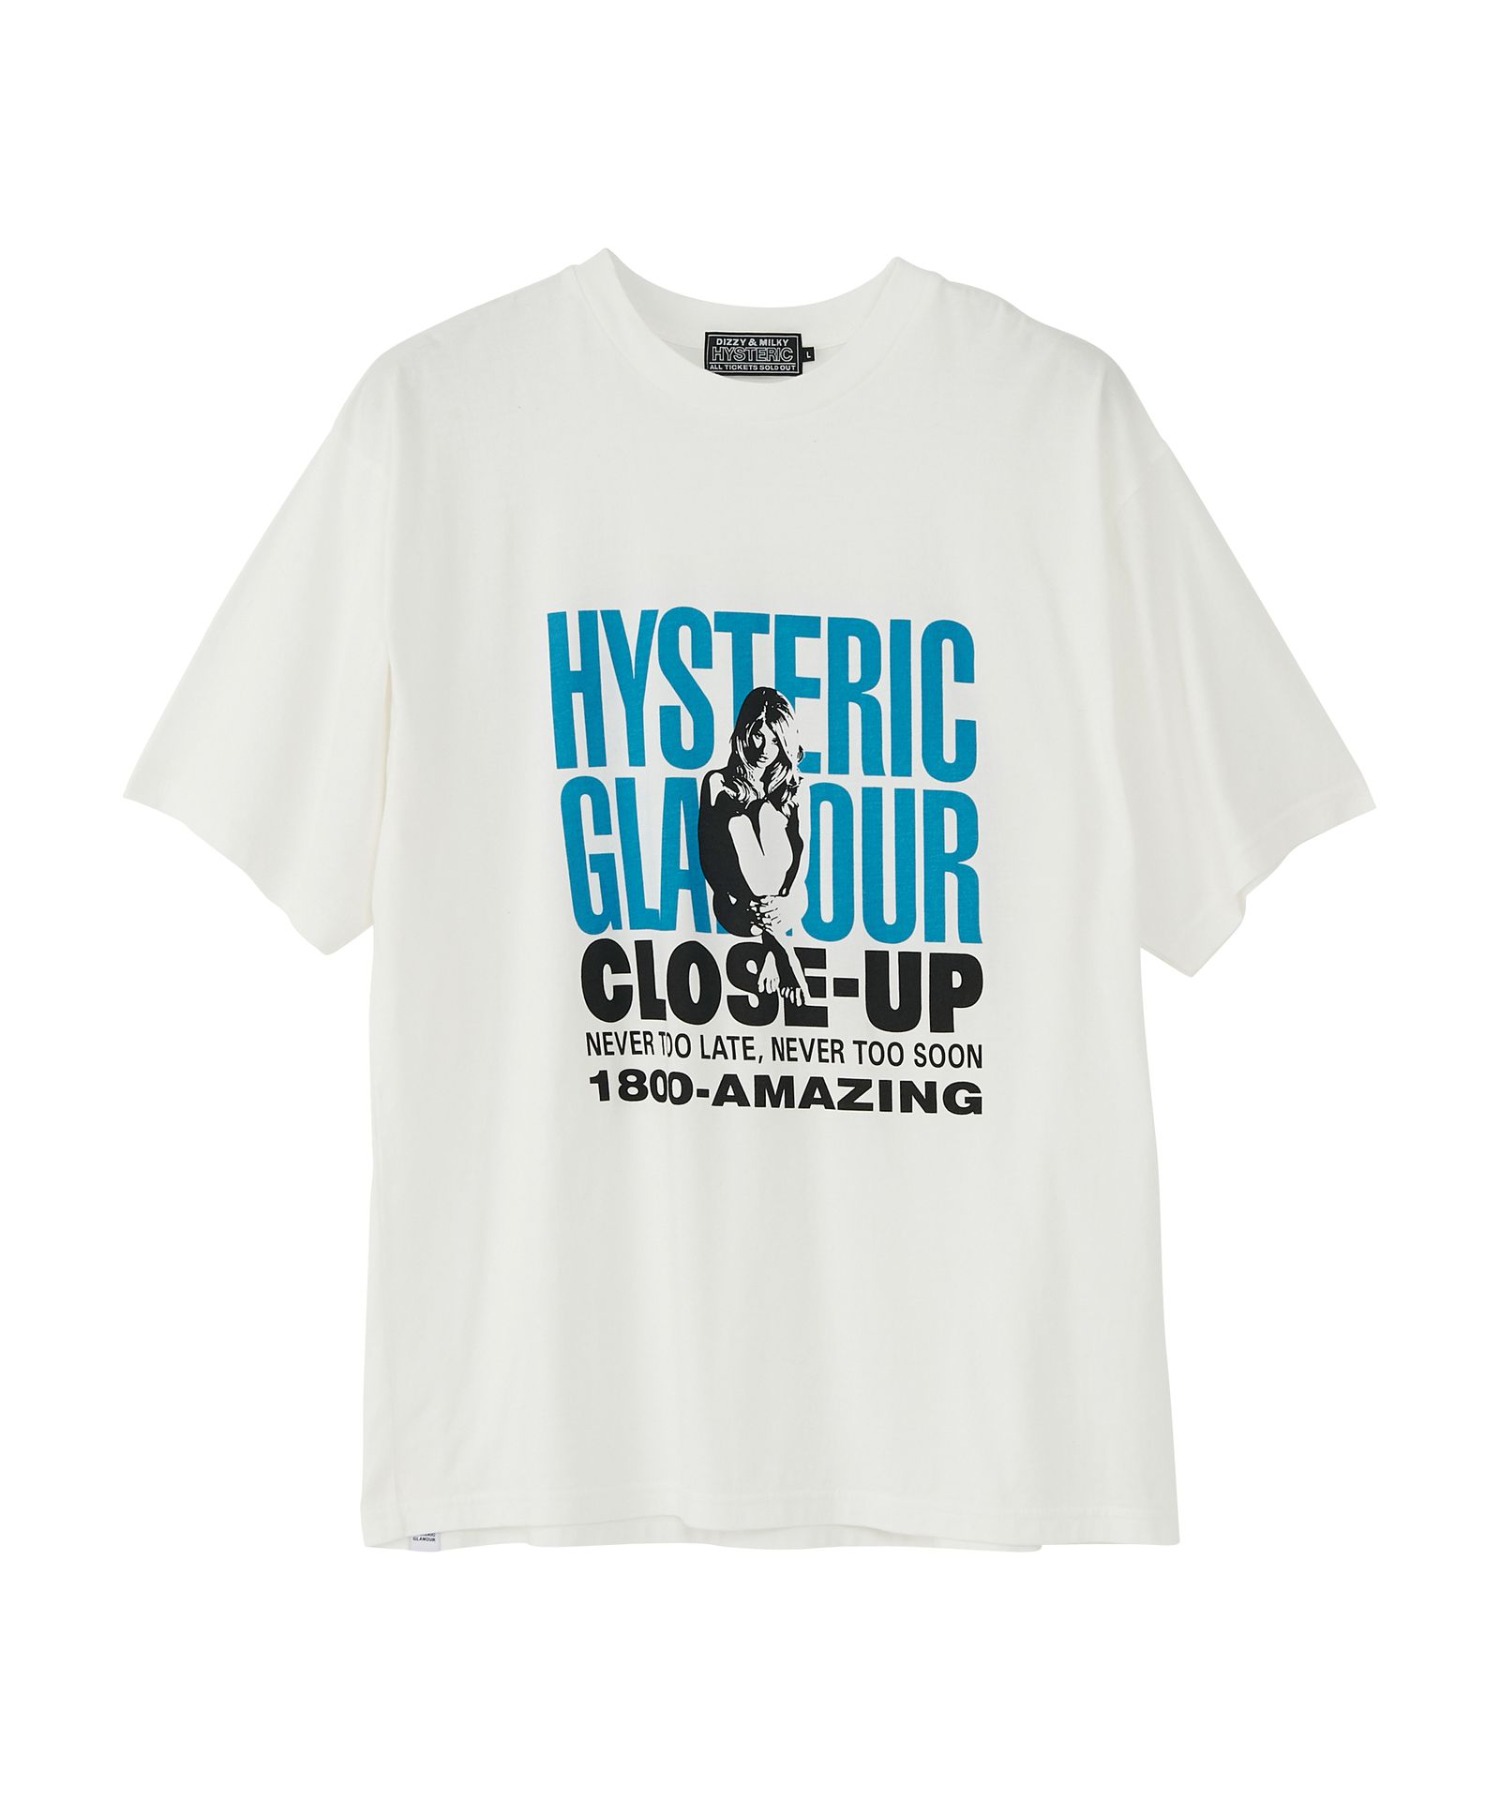 CLOSE UP Tシャツ HYSTERIC GLAMOUR MEN│HYSTERIC GLAMOUR ONLINE STORE ヒステリックグラマー オンラインストア